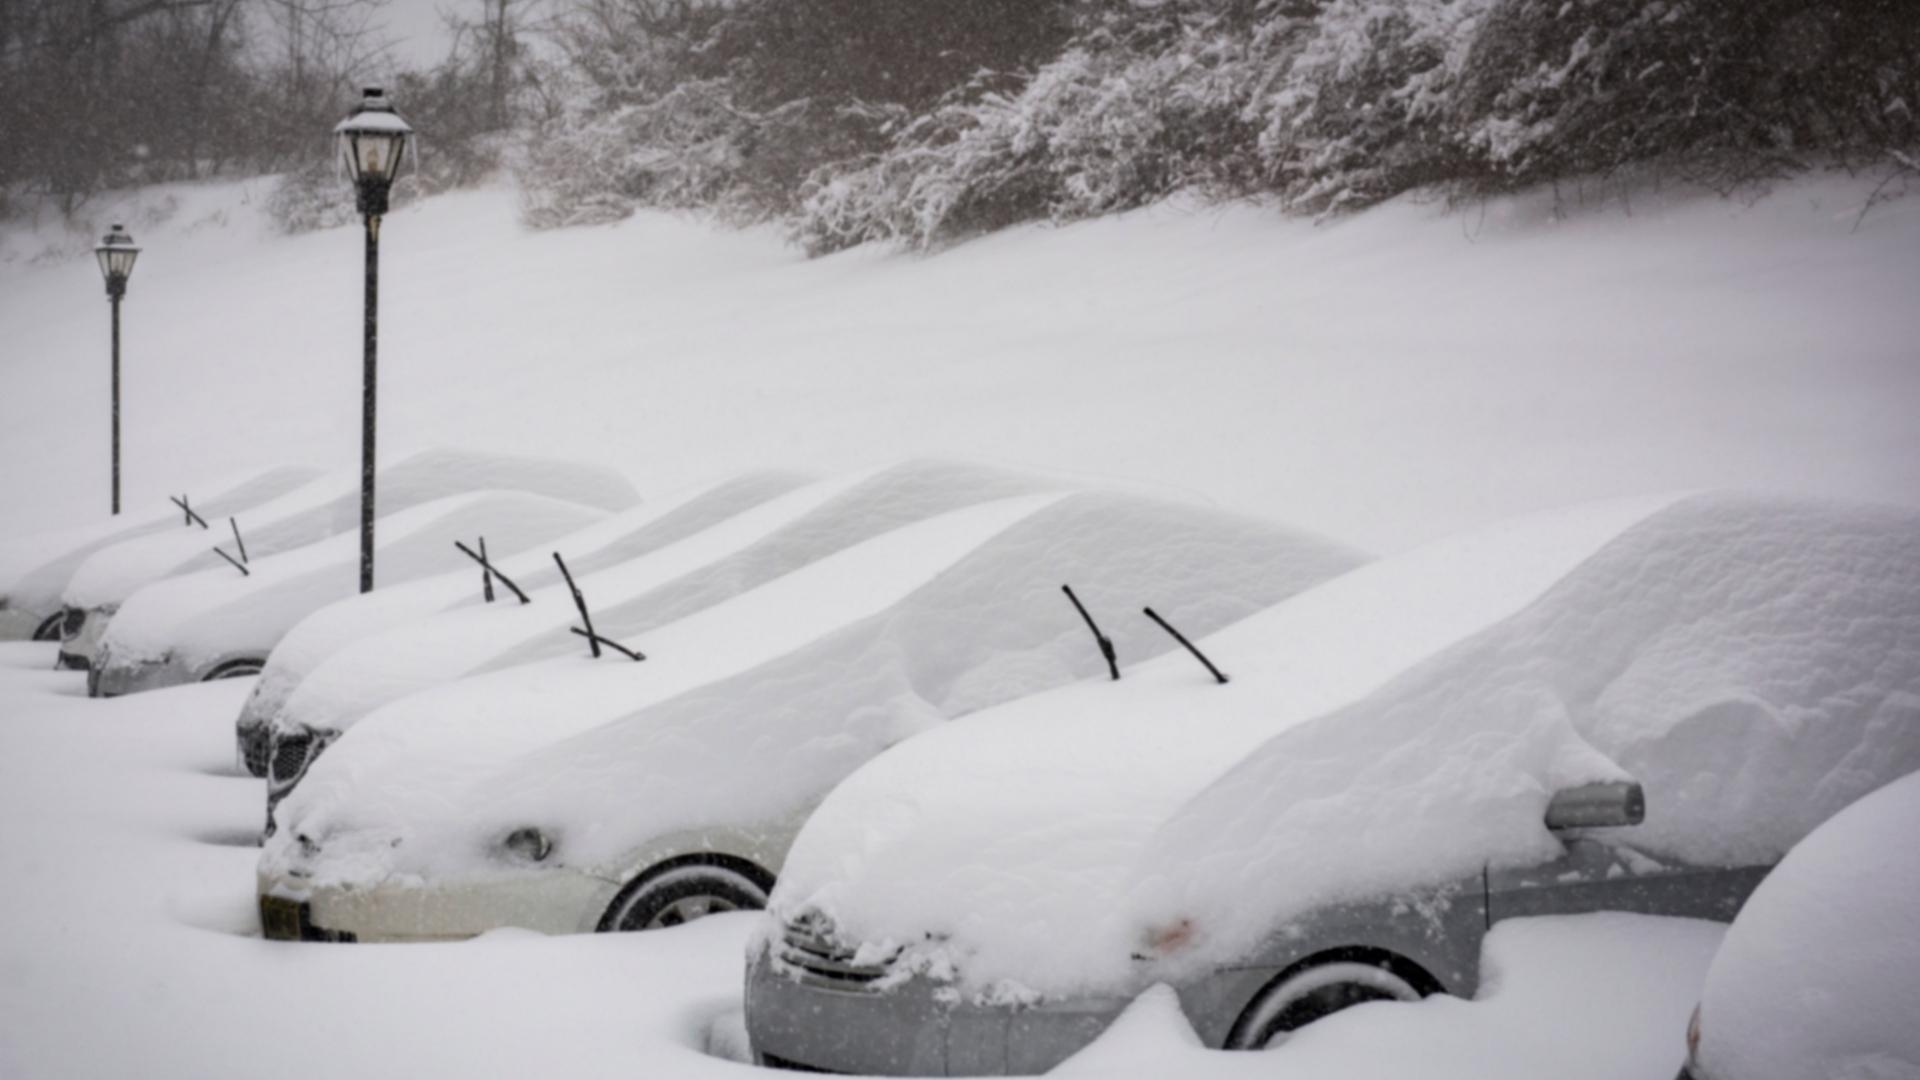 Cars on the parking lot completely covered with snow, blizzard outside, windshield wipers is lifted up on all cars